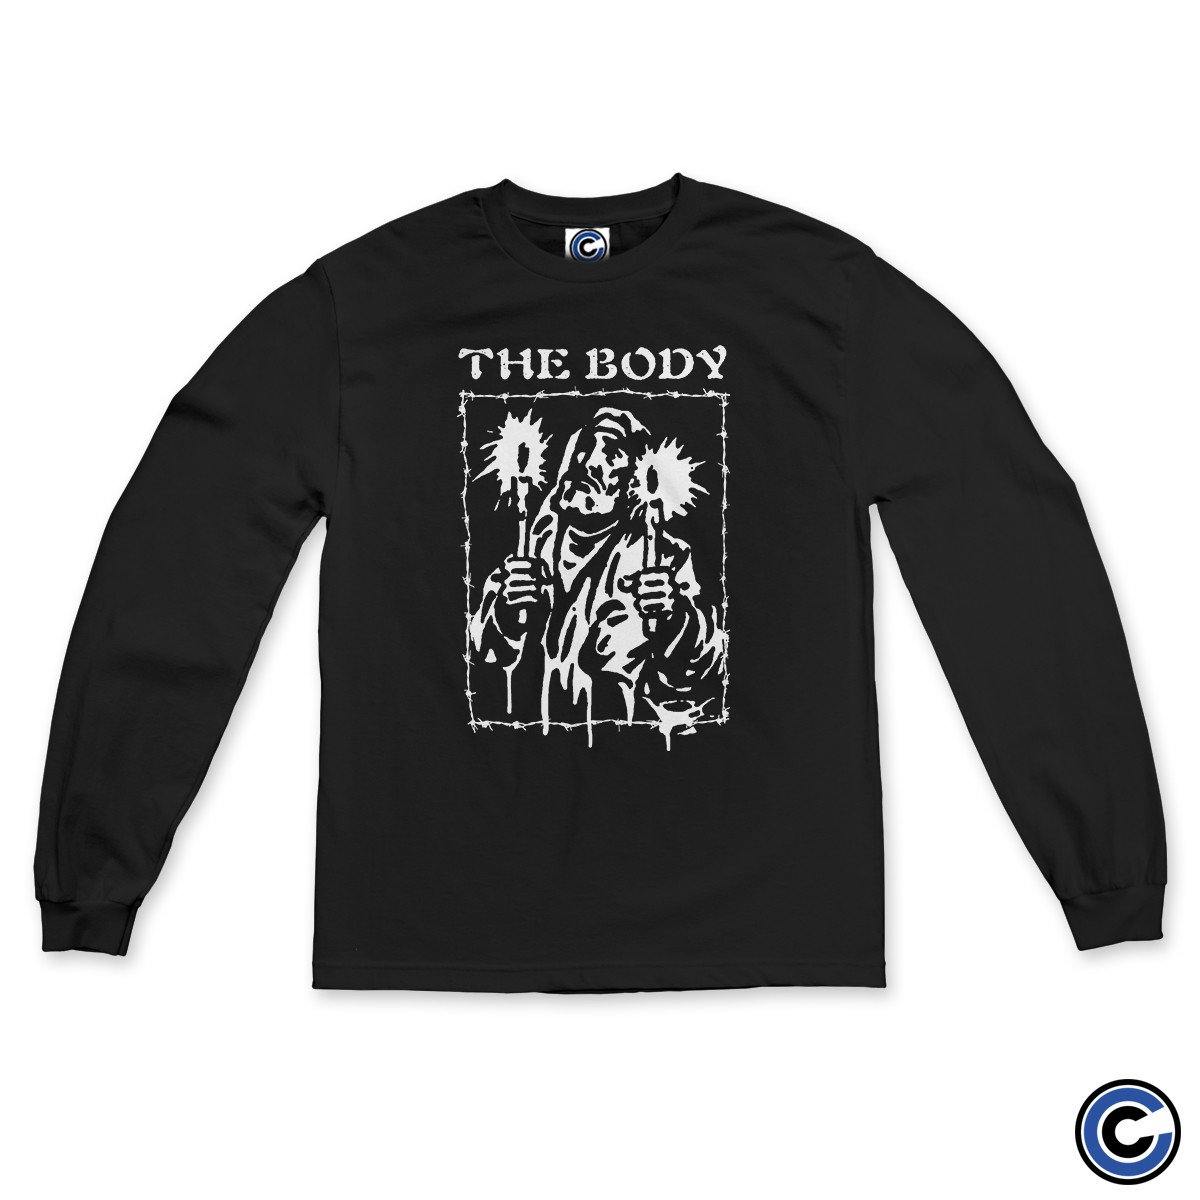 Buy – The Body "Candles" Long Sleeve – Band & Music Merch – Cold Cuts Merch